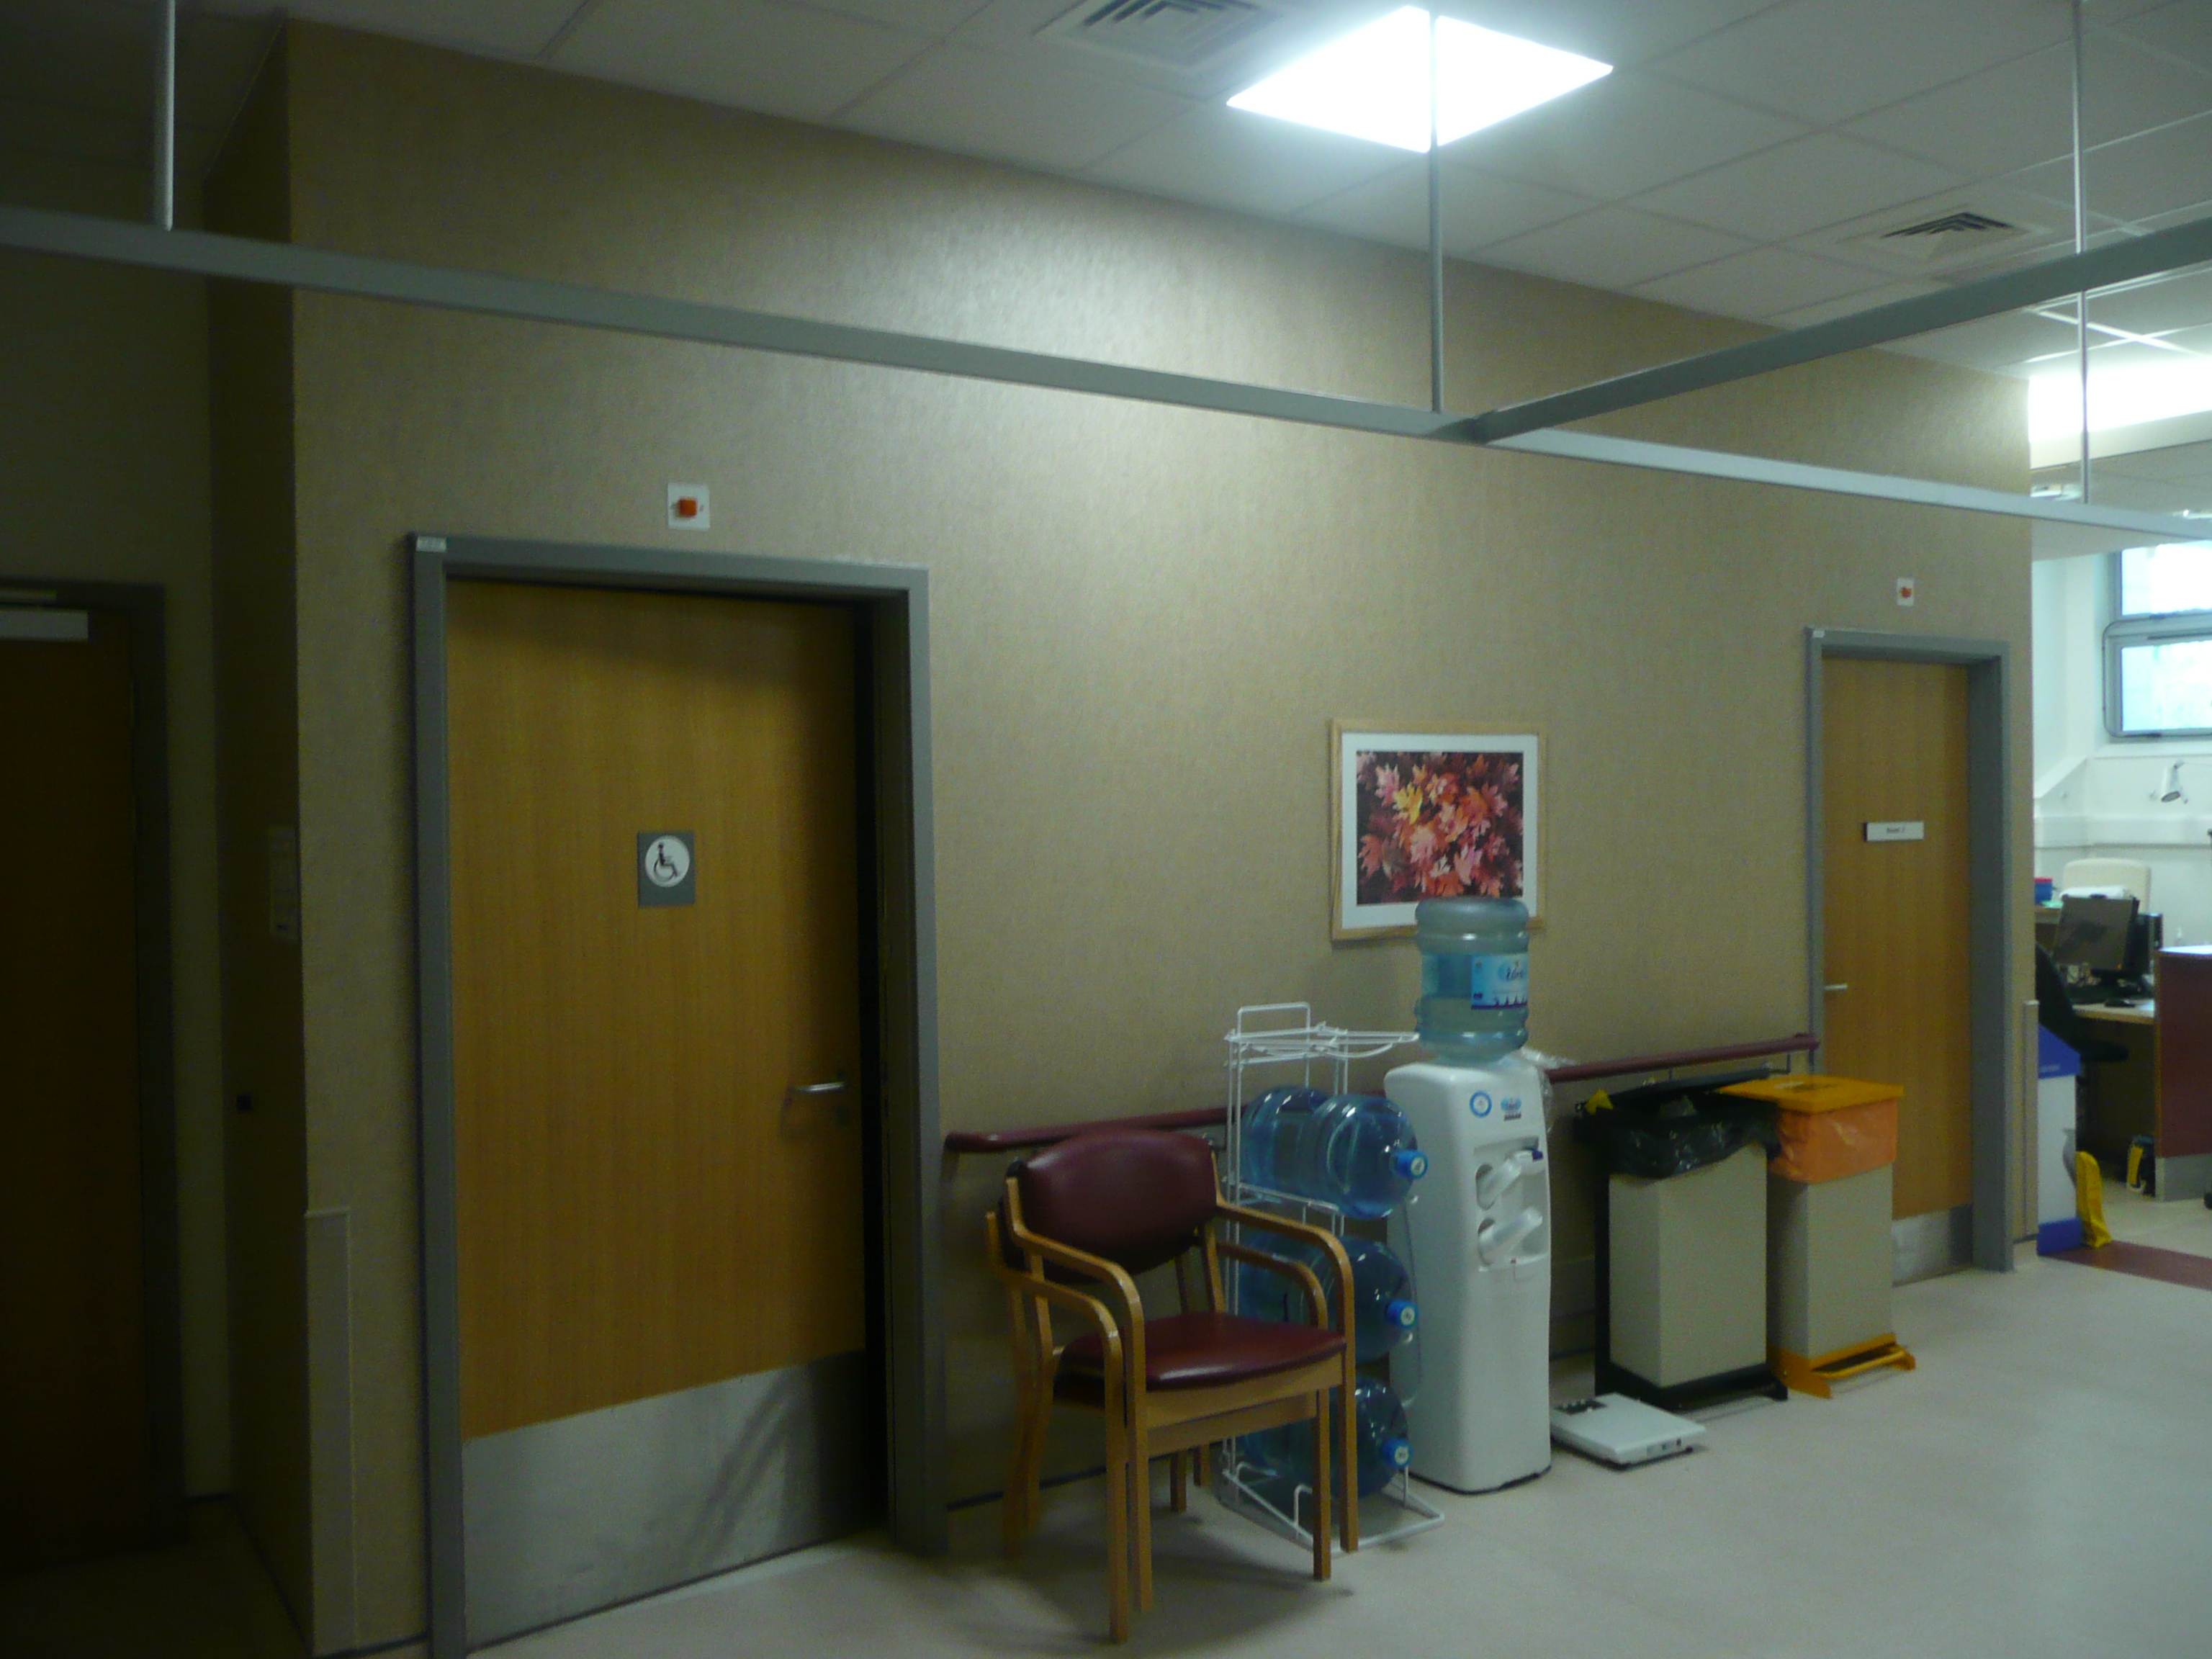 Day Treatment Unit, view from treatment areas with beds and chairs.